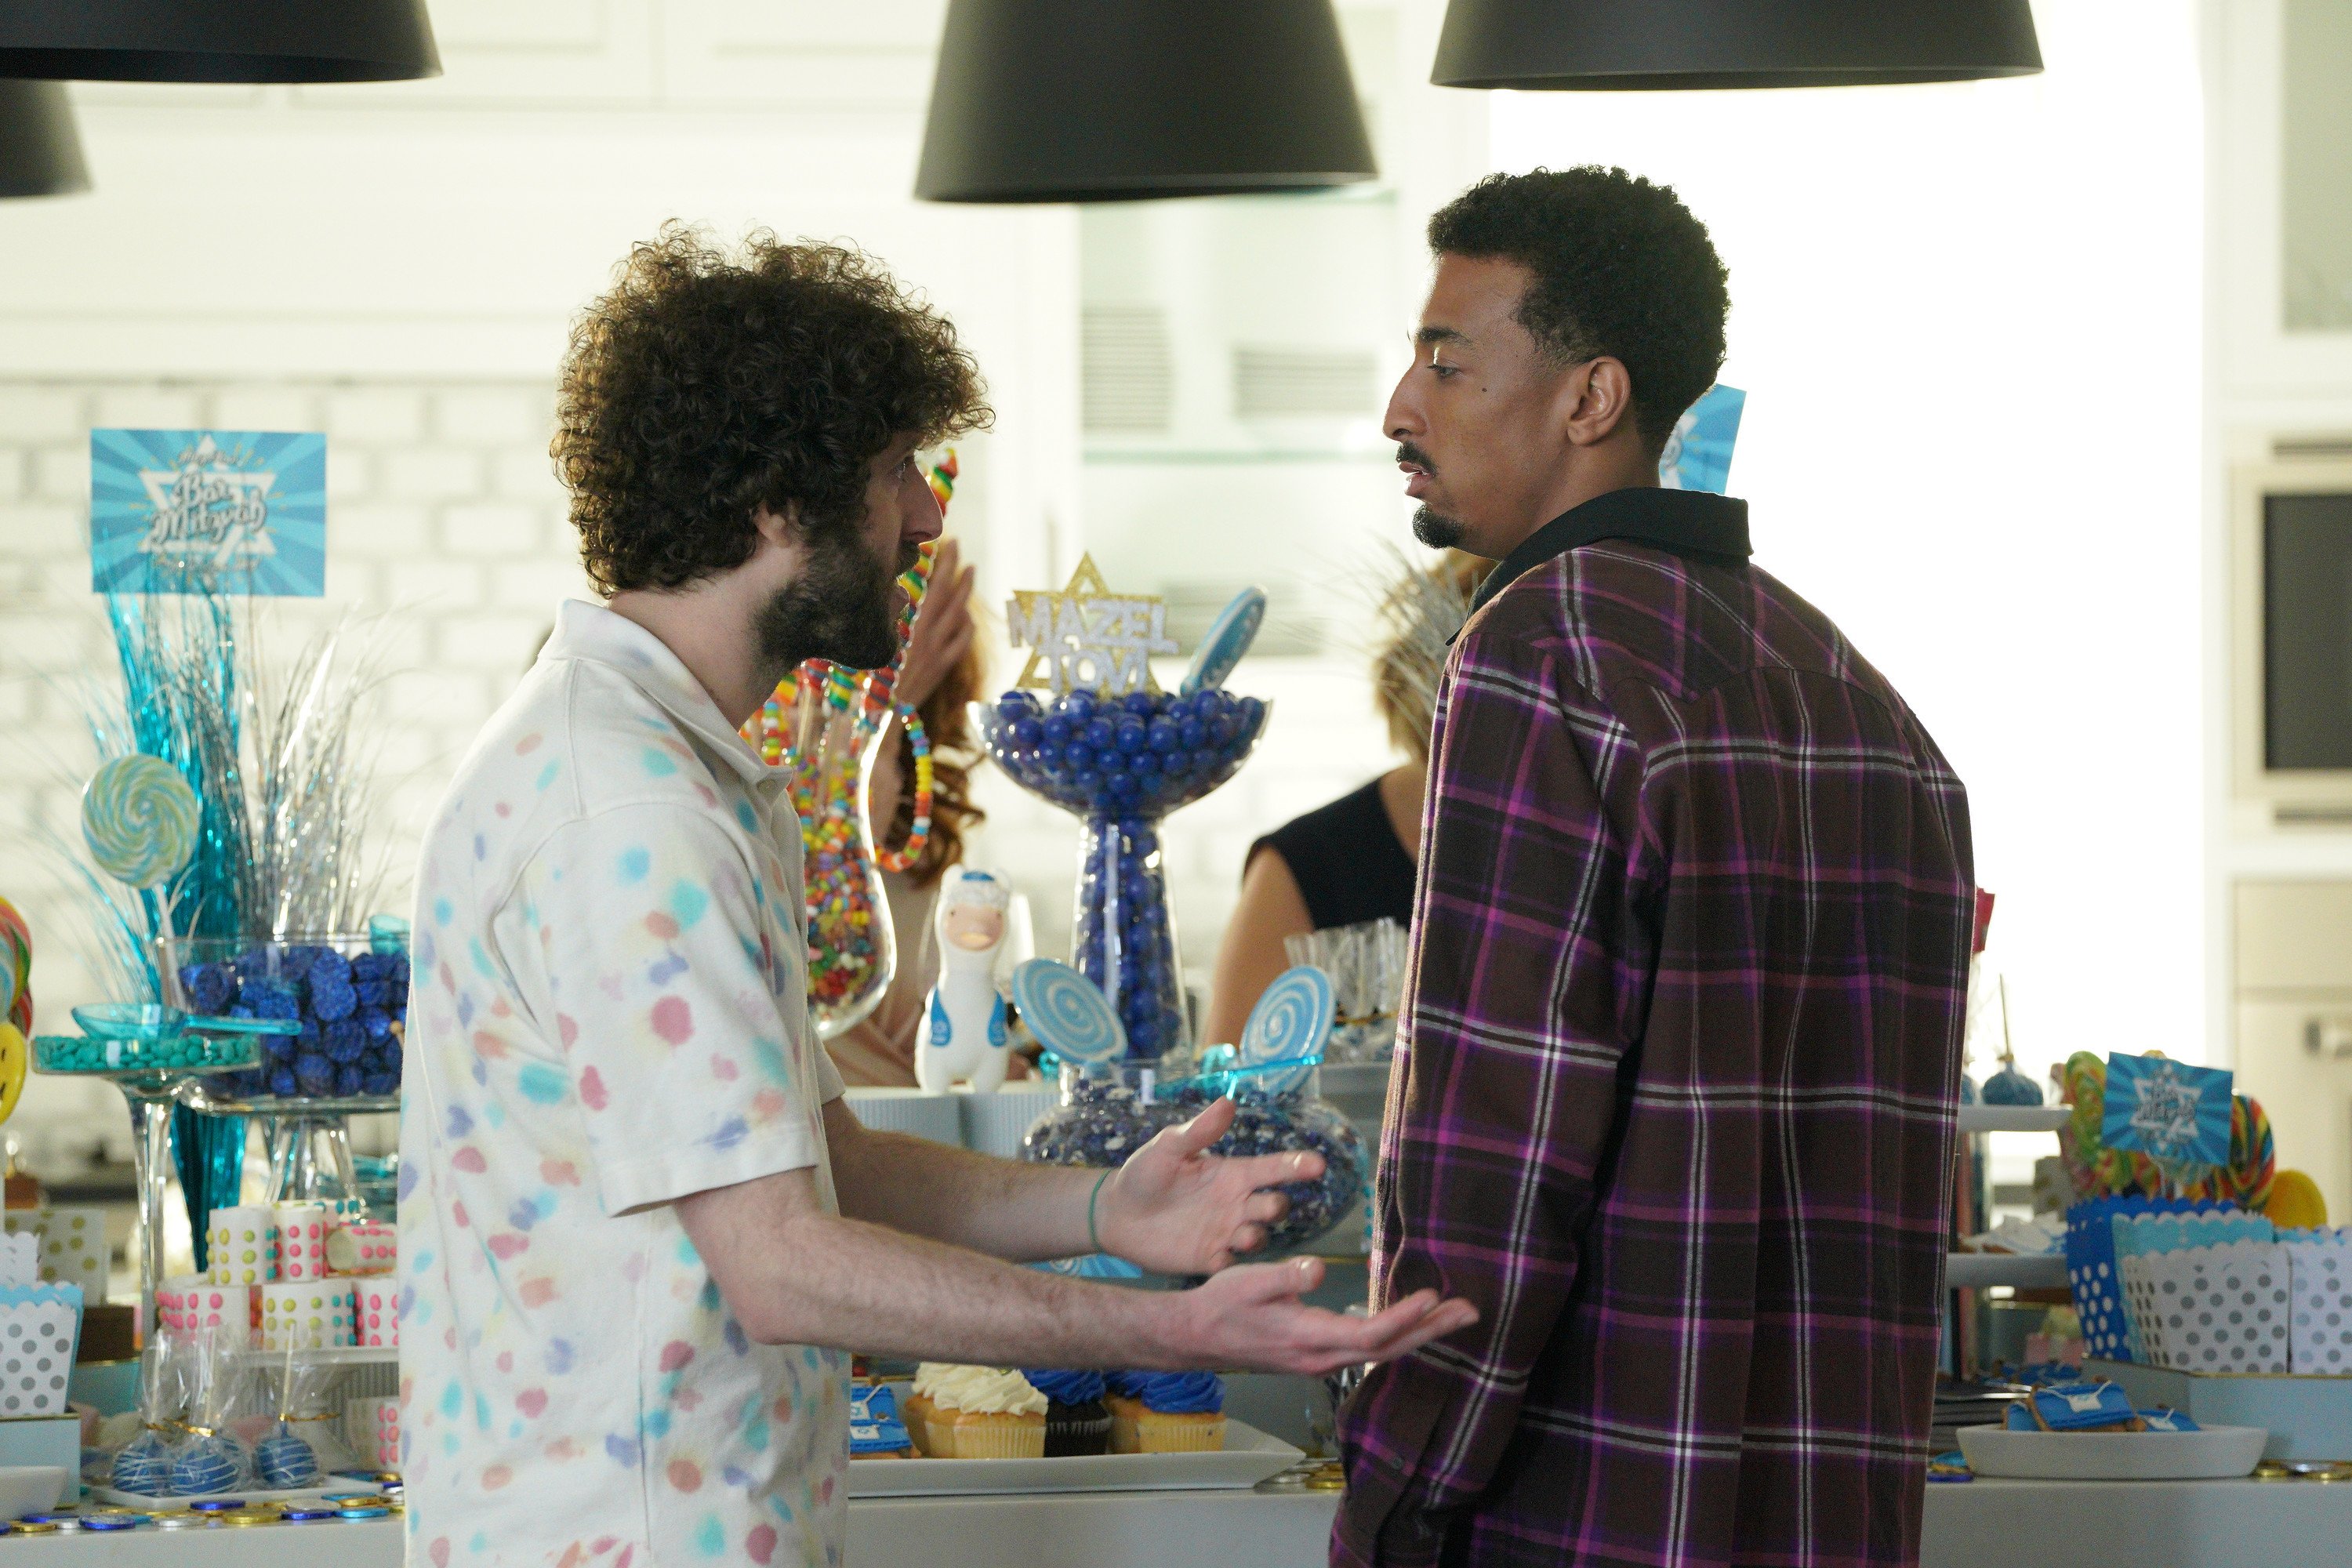 Dave 'Lil Dicky' Burd and Travis 'Taco' Bennett as Elz in FX series 'Dave' Season 2 'Bar Mitzvah'